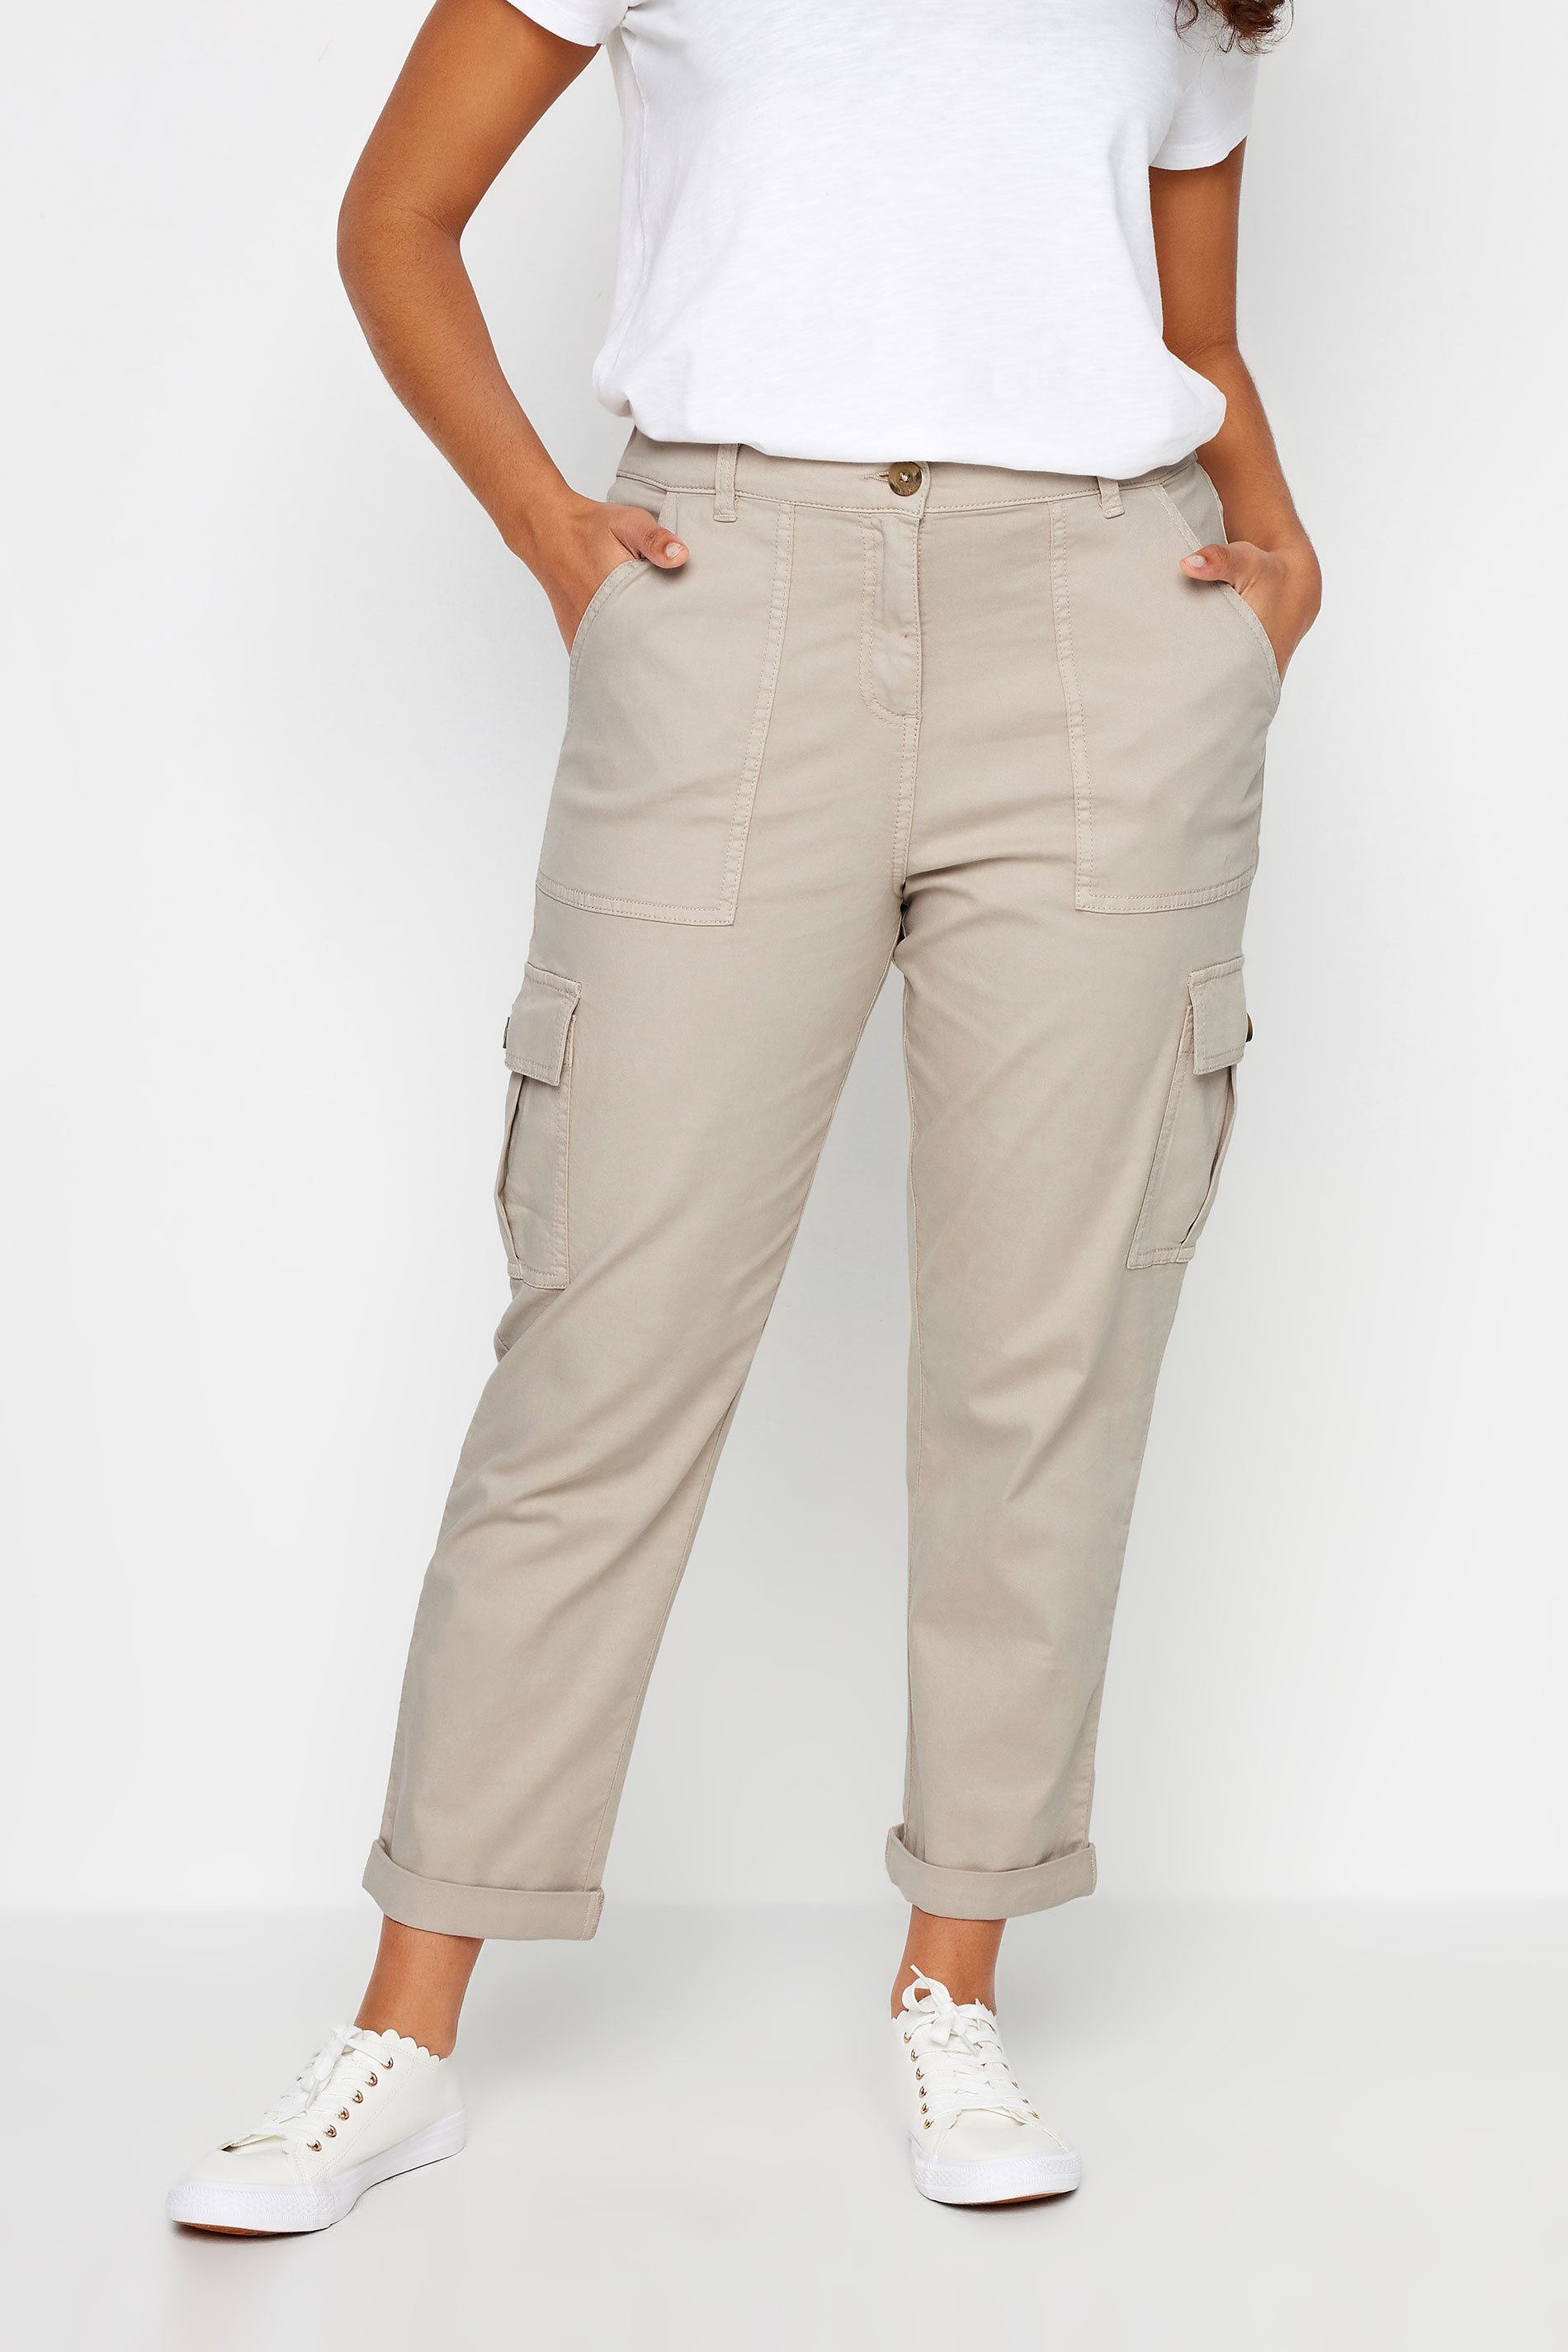 M&Co Neutral Brown Cargo Trousers | M&Co 2